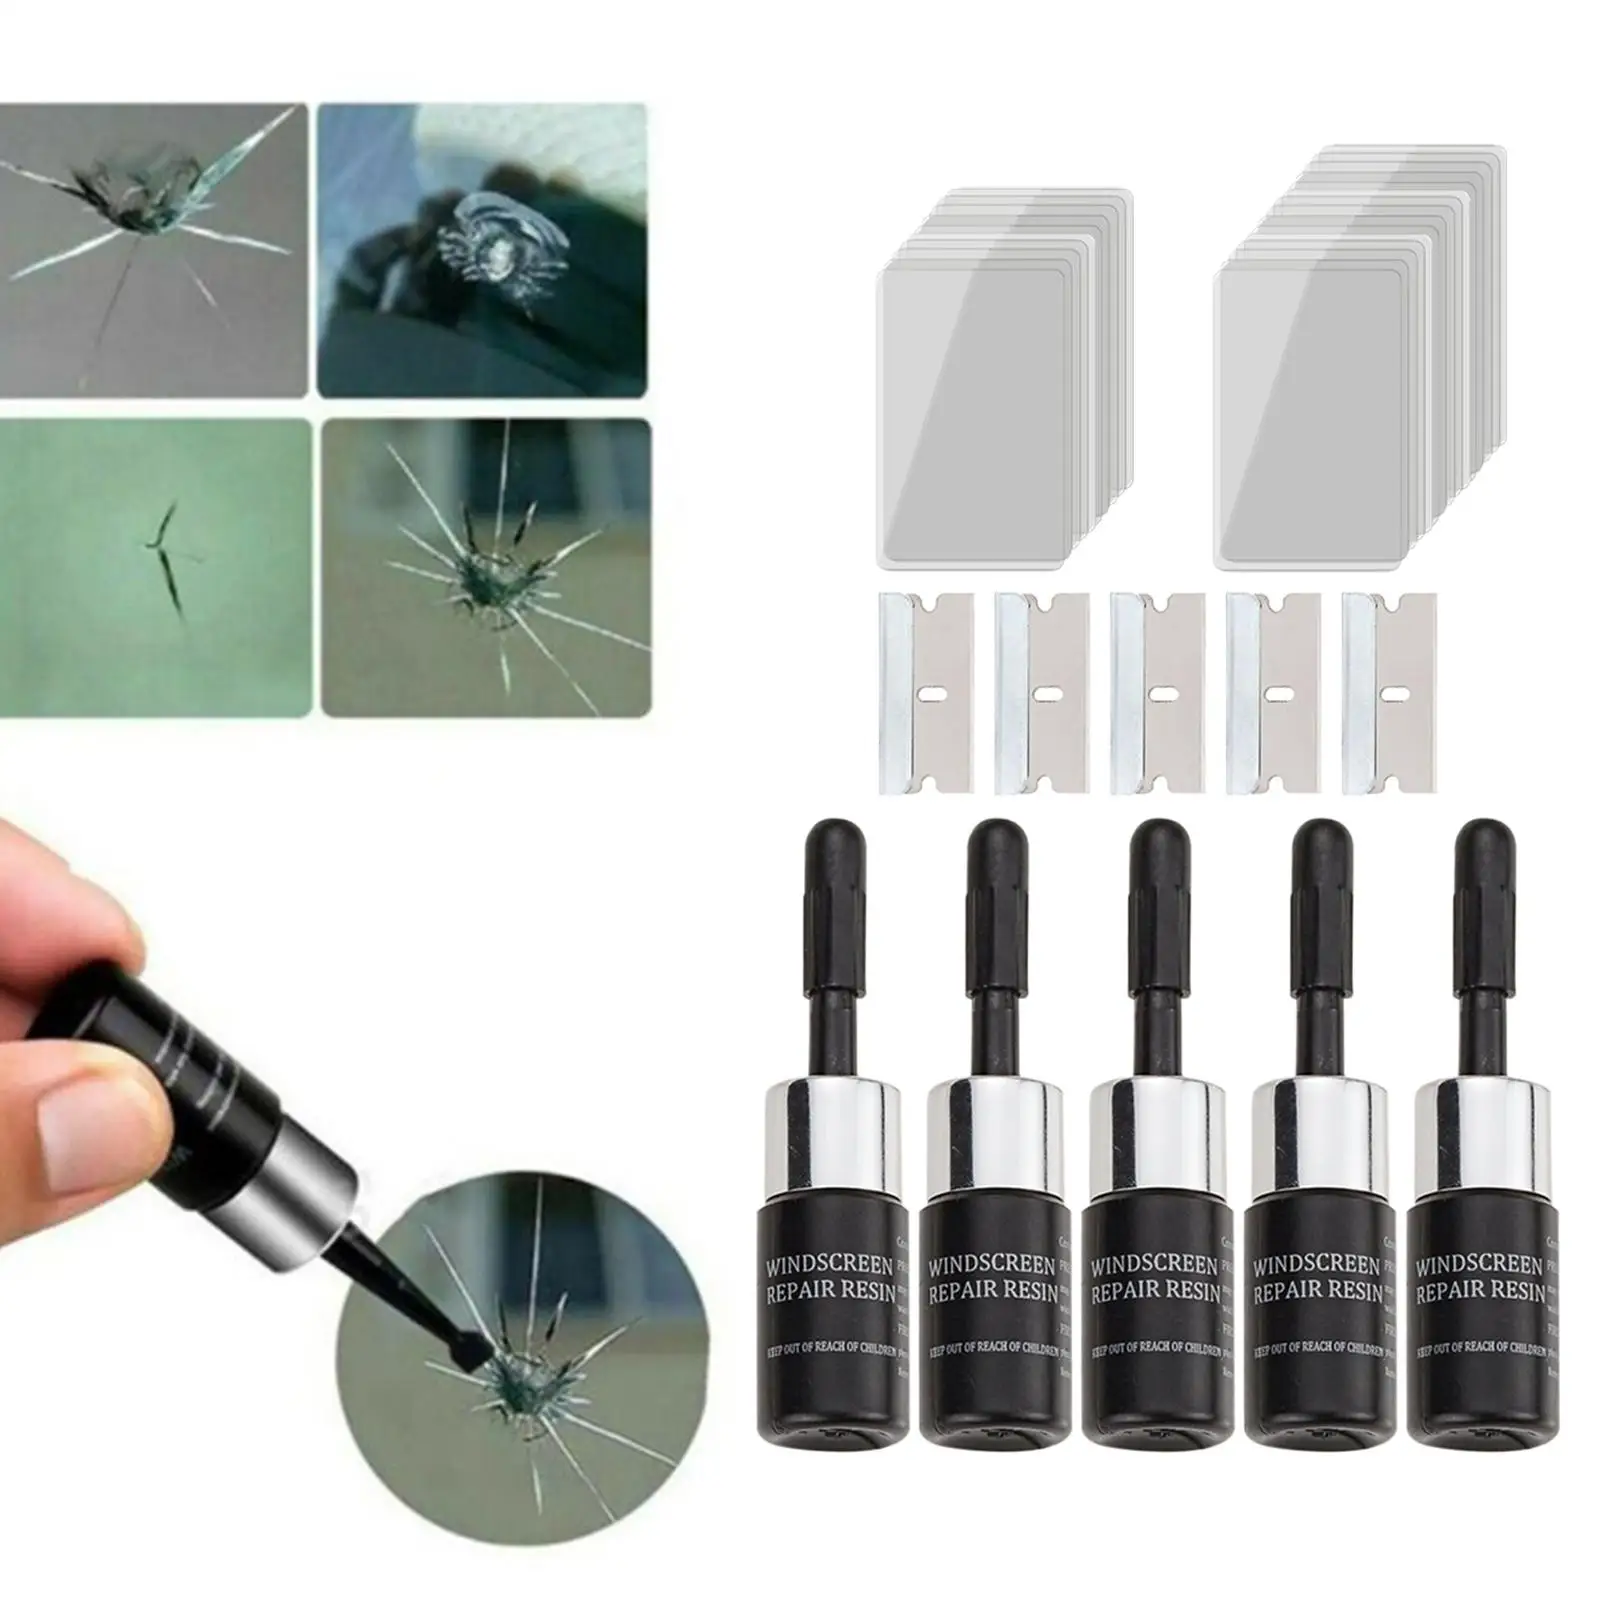 5x Glass repair Fluid Windshield Resin Crack Tool, Spare Parts